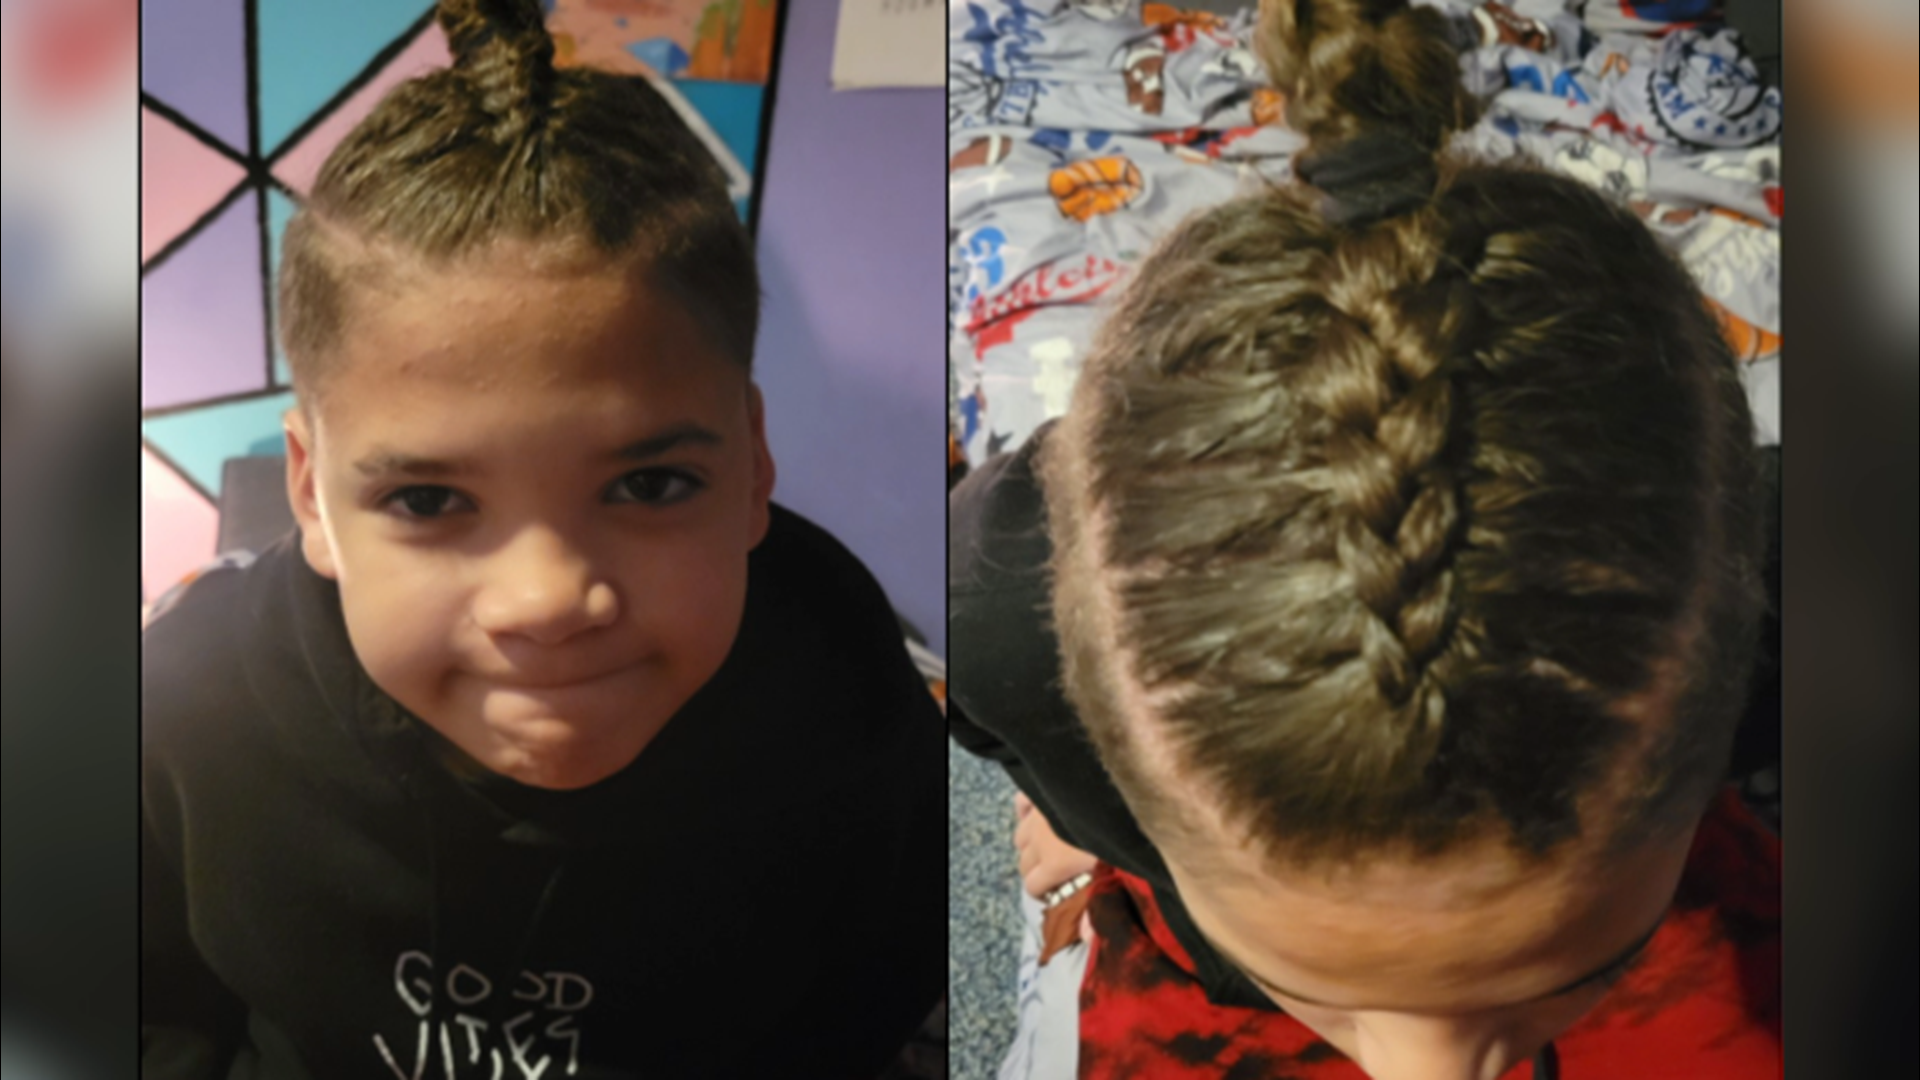 A Troy mother said her son has been given in-school suspension and does his work in a cubicle because of his braided hairstyle.